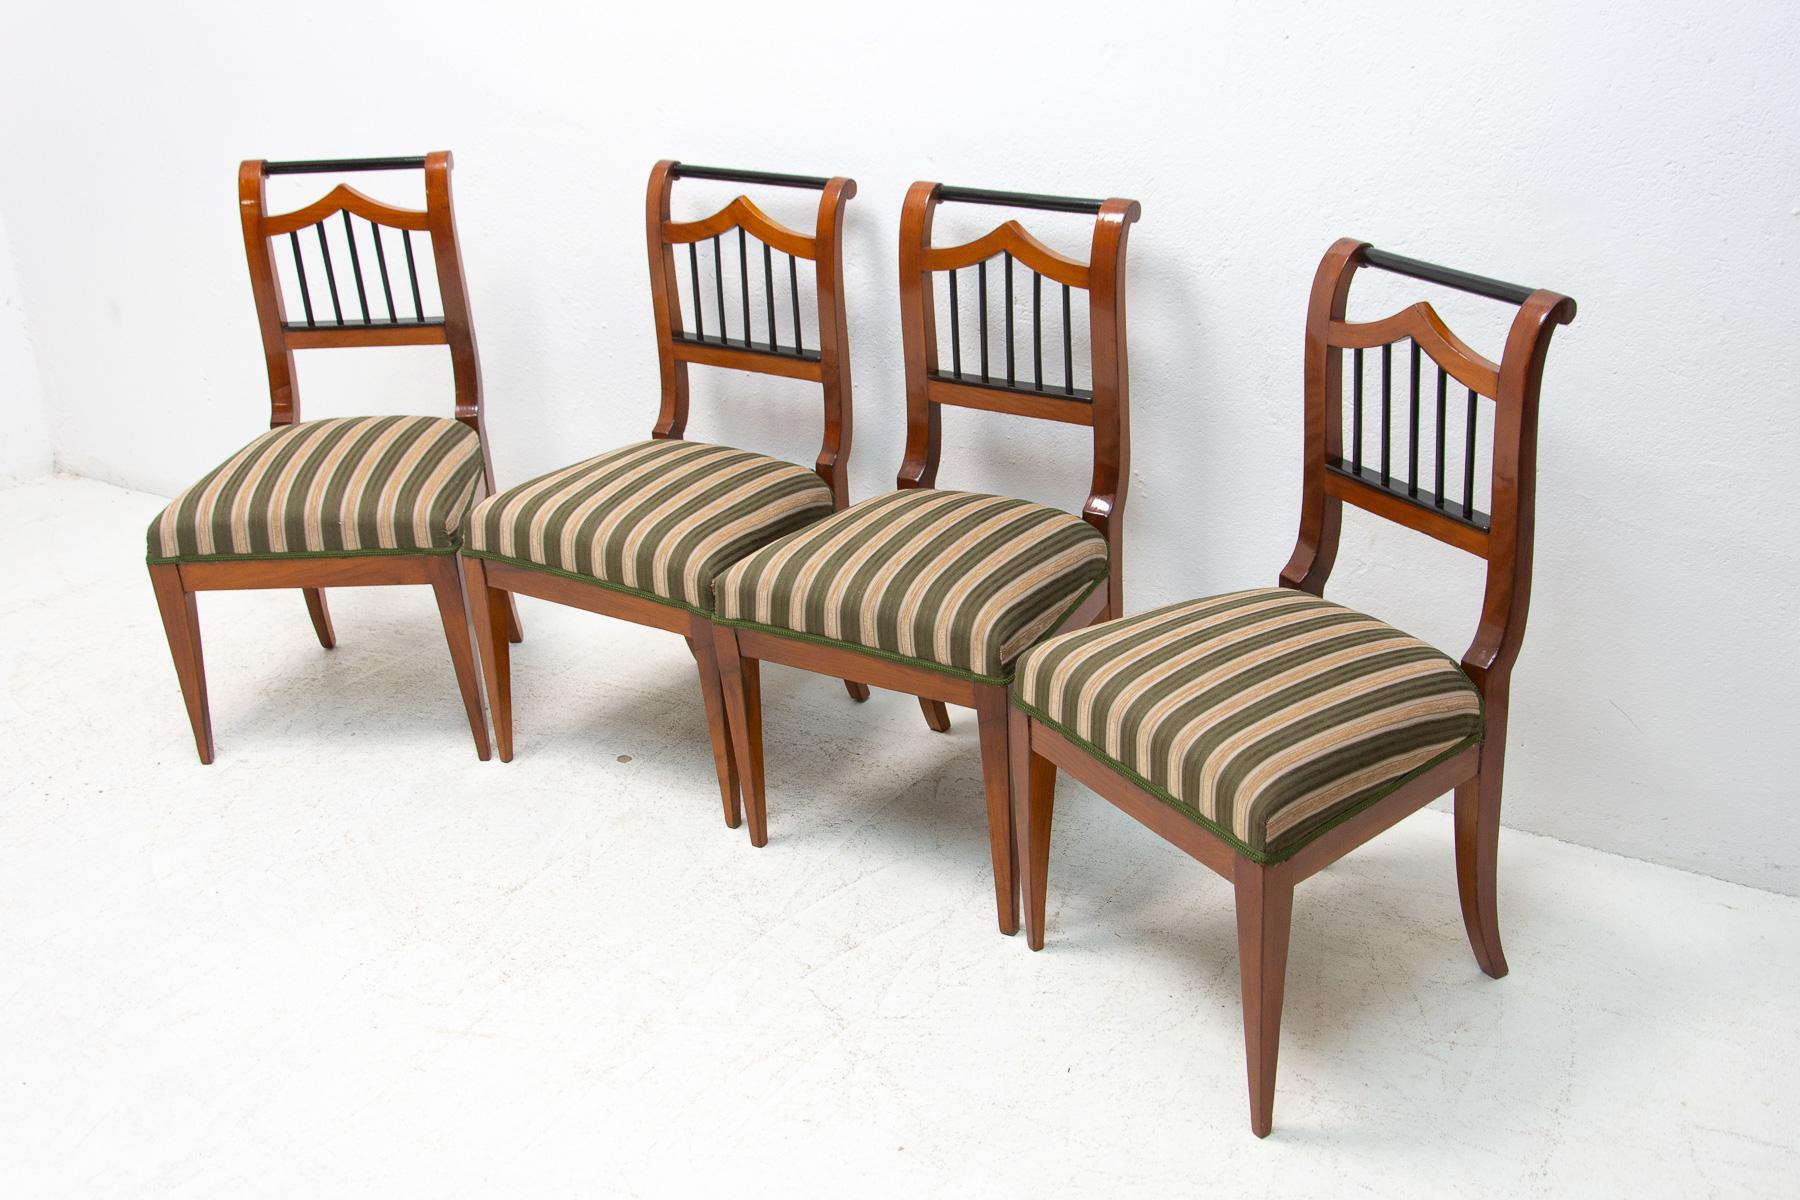 Fabric Fully Restored Biedermeier Dining Chairs, Austria-Hungary, 1830´s, Set of 4